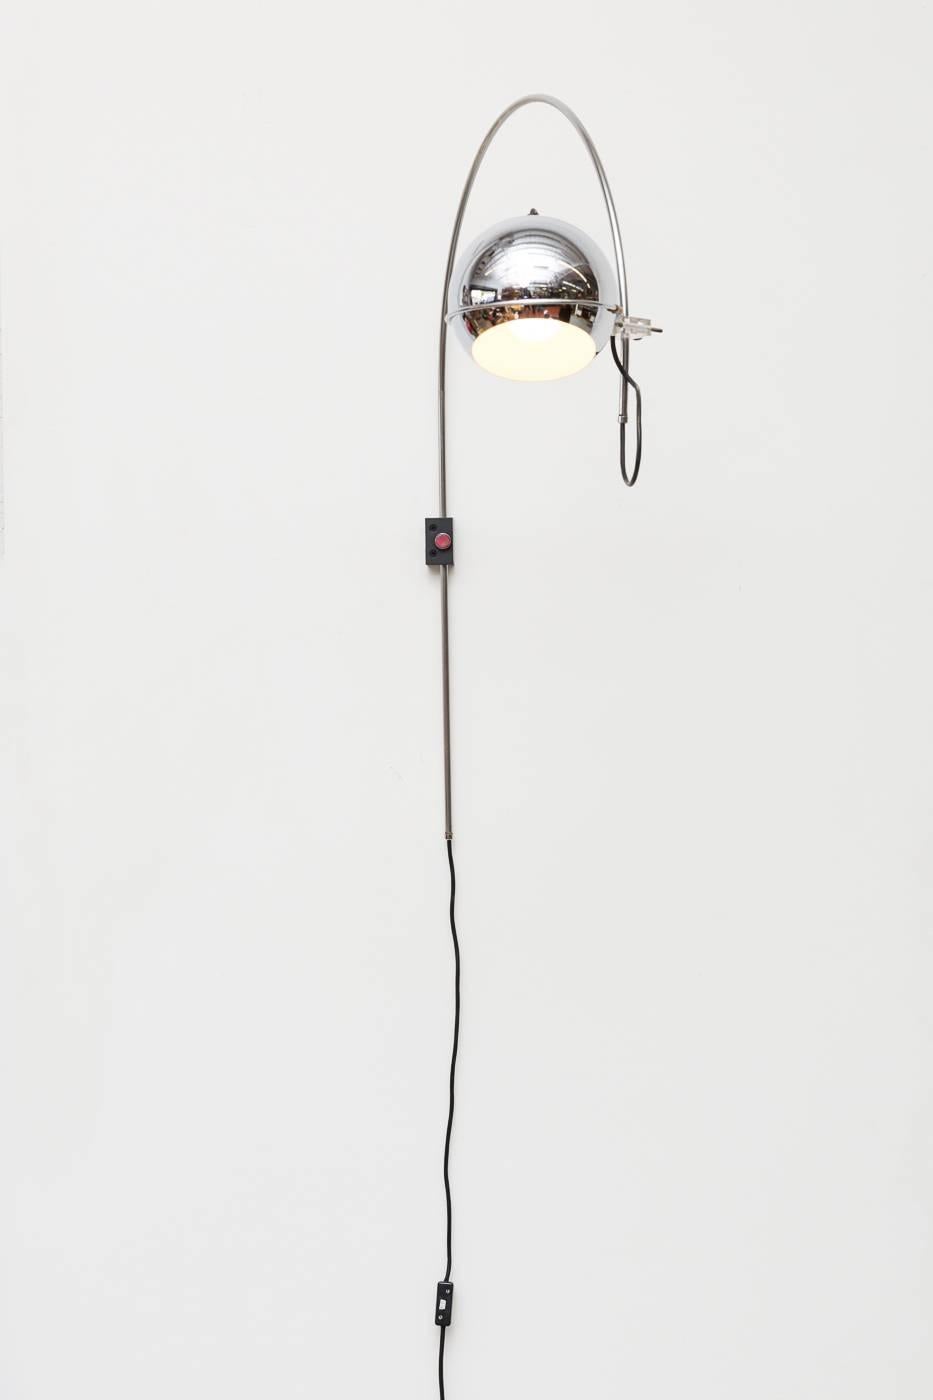 1970s midcentury chrome Gepo arc wall lamp with acrylic hardware and black rectangular mount. Good original condition with visible wear consistent with its age and usage.